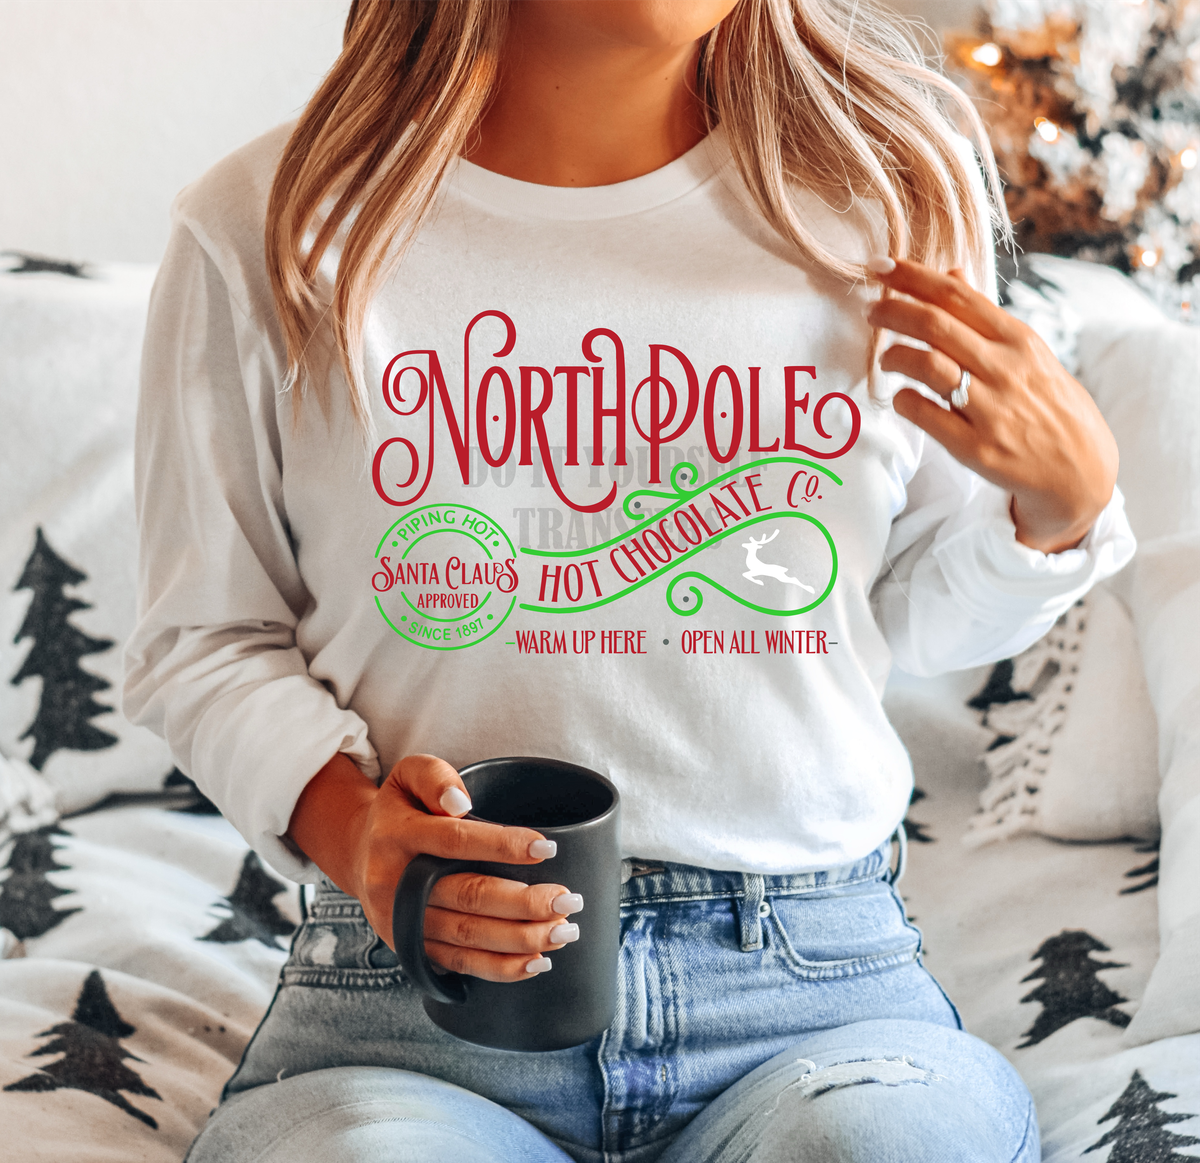 Northpole Santa Claus apprived Hot Chocolate co Christmas Winter   adult size  DTF TRANSFERPRINT TO ORDER